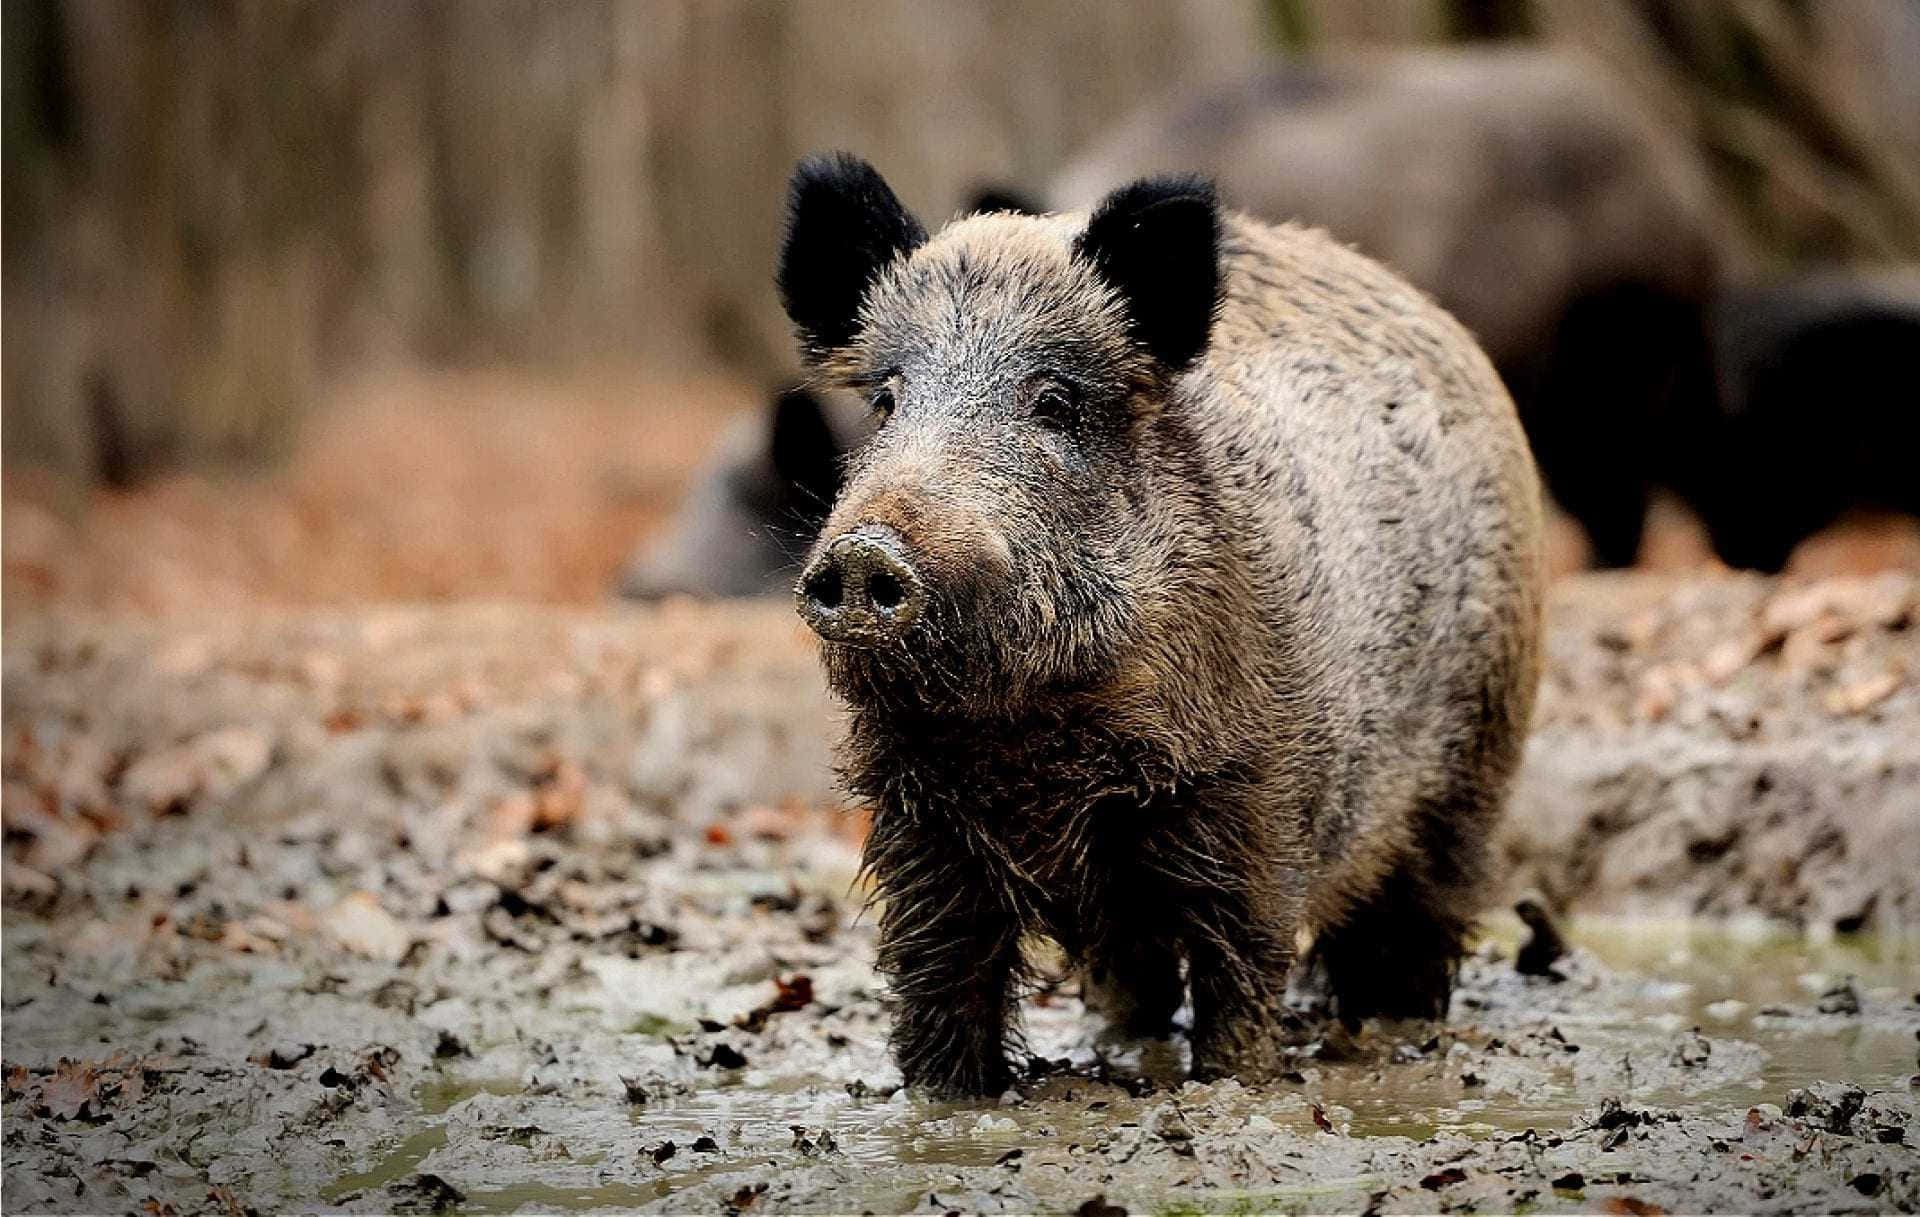 "A Wild Boar Always Hungry for Adventure"